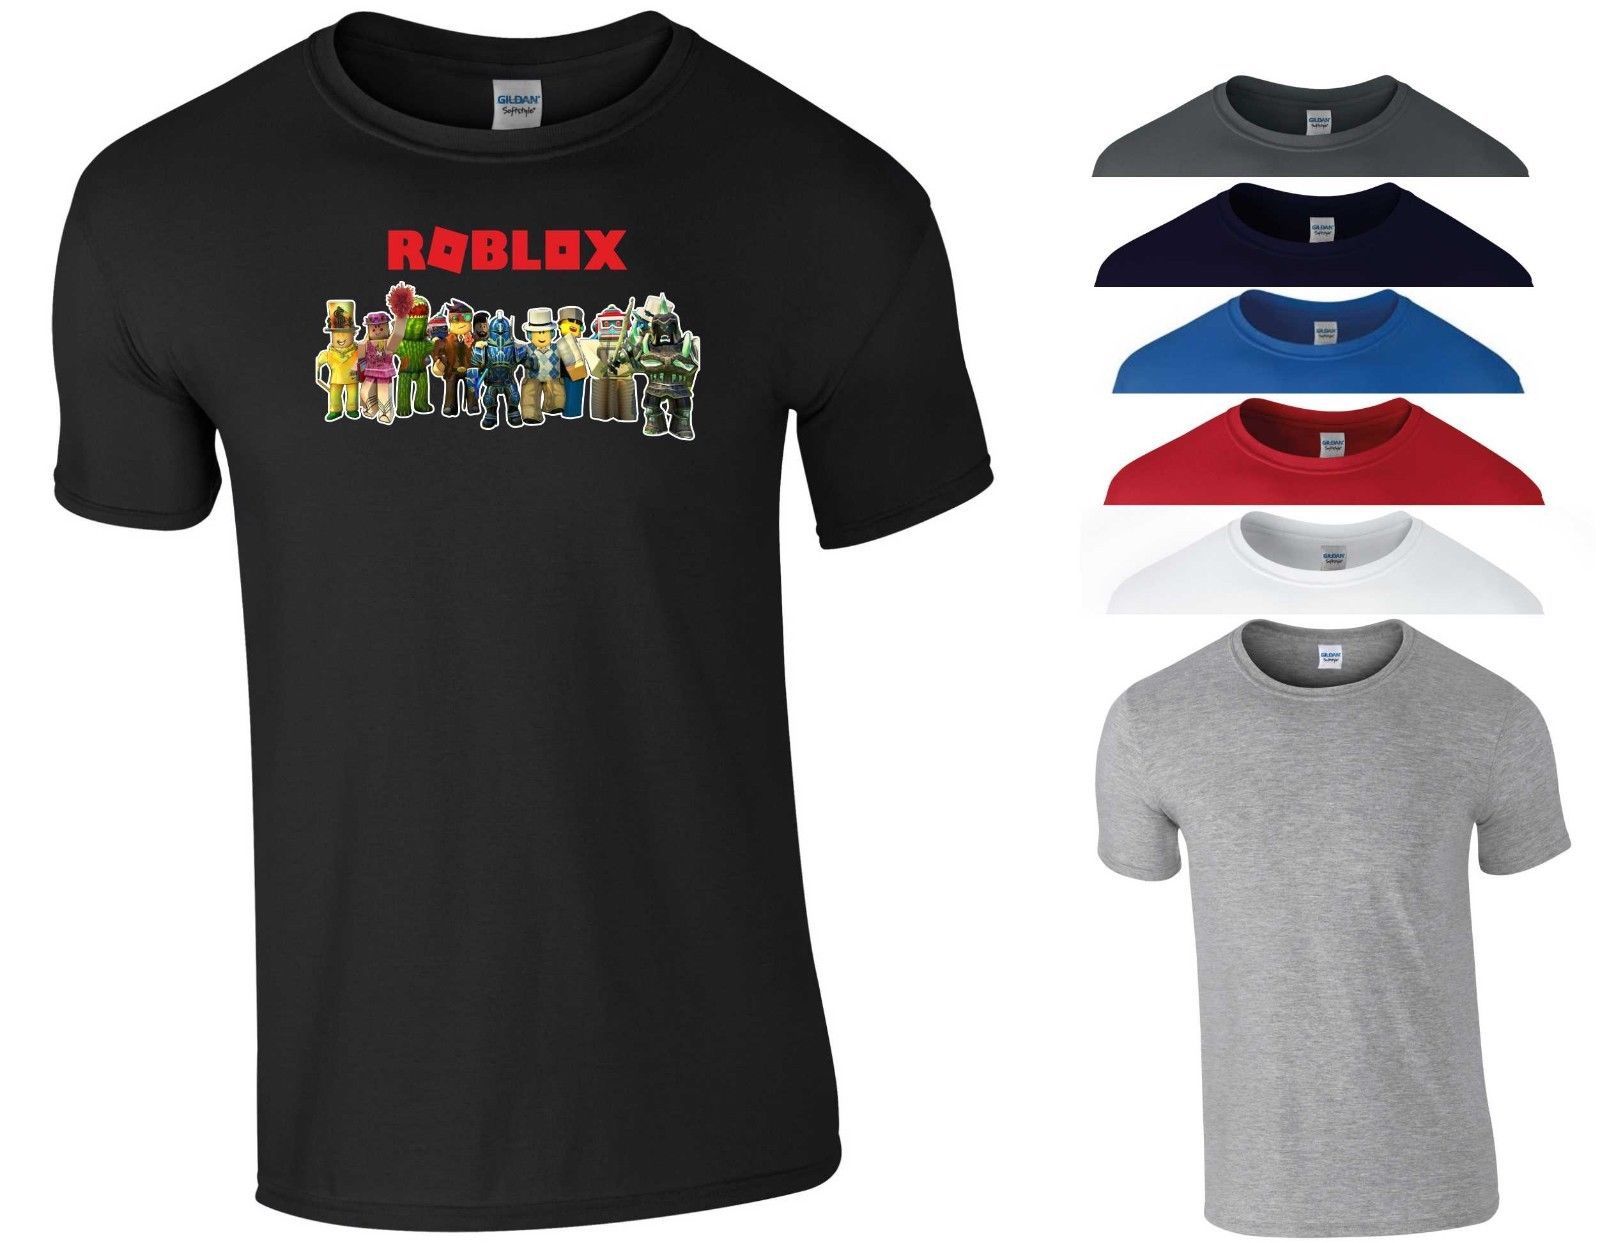 Free Cool T Shirts In Roblox Buyudum Cocuk Oldum - how to get free t shirts on roblox